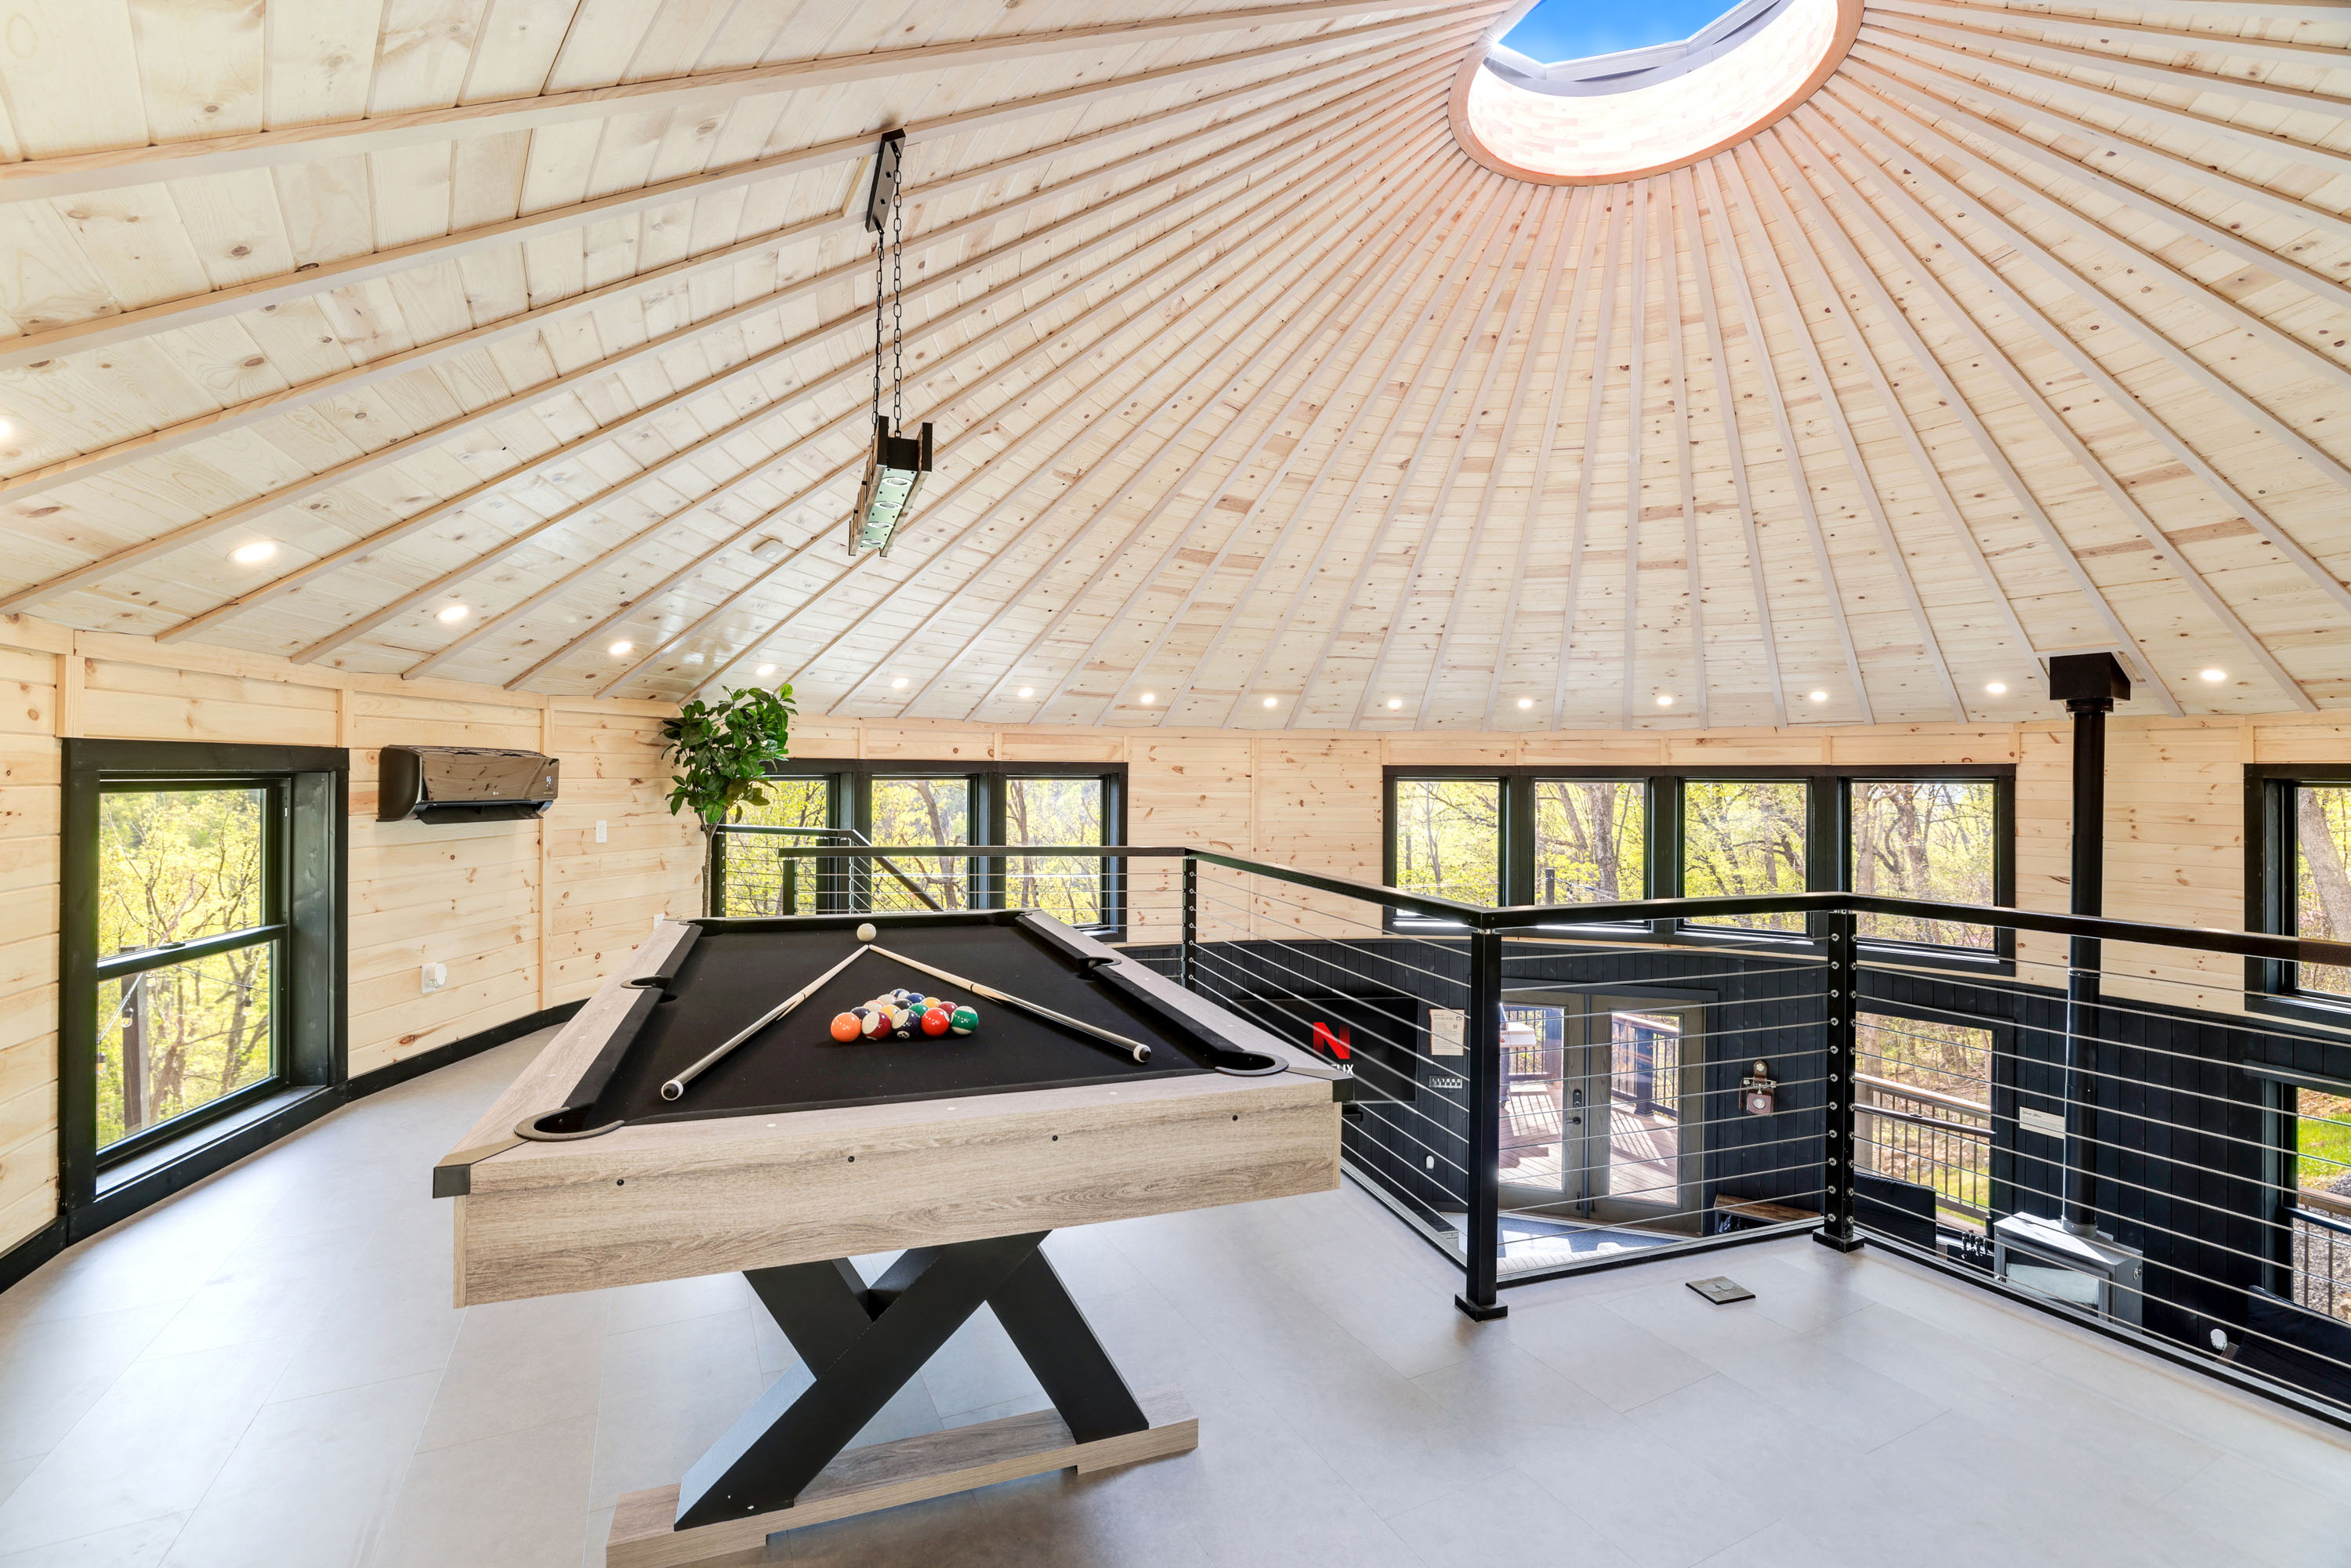 <span  class="uc_style_uc_tiles_grid_image_elementor_uc_items_attribute_title" style="color:#ffffff;">Full-Size Pool Table in Loft - Skyline Yurt</span>